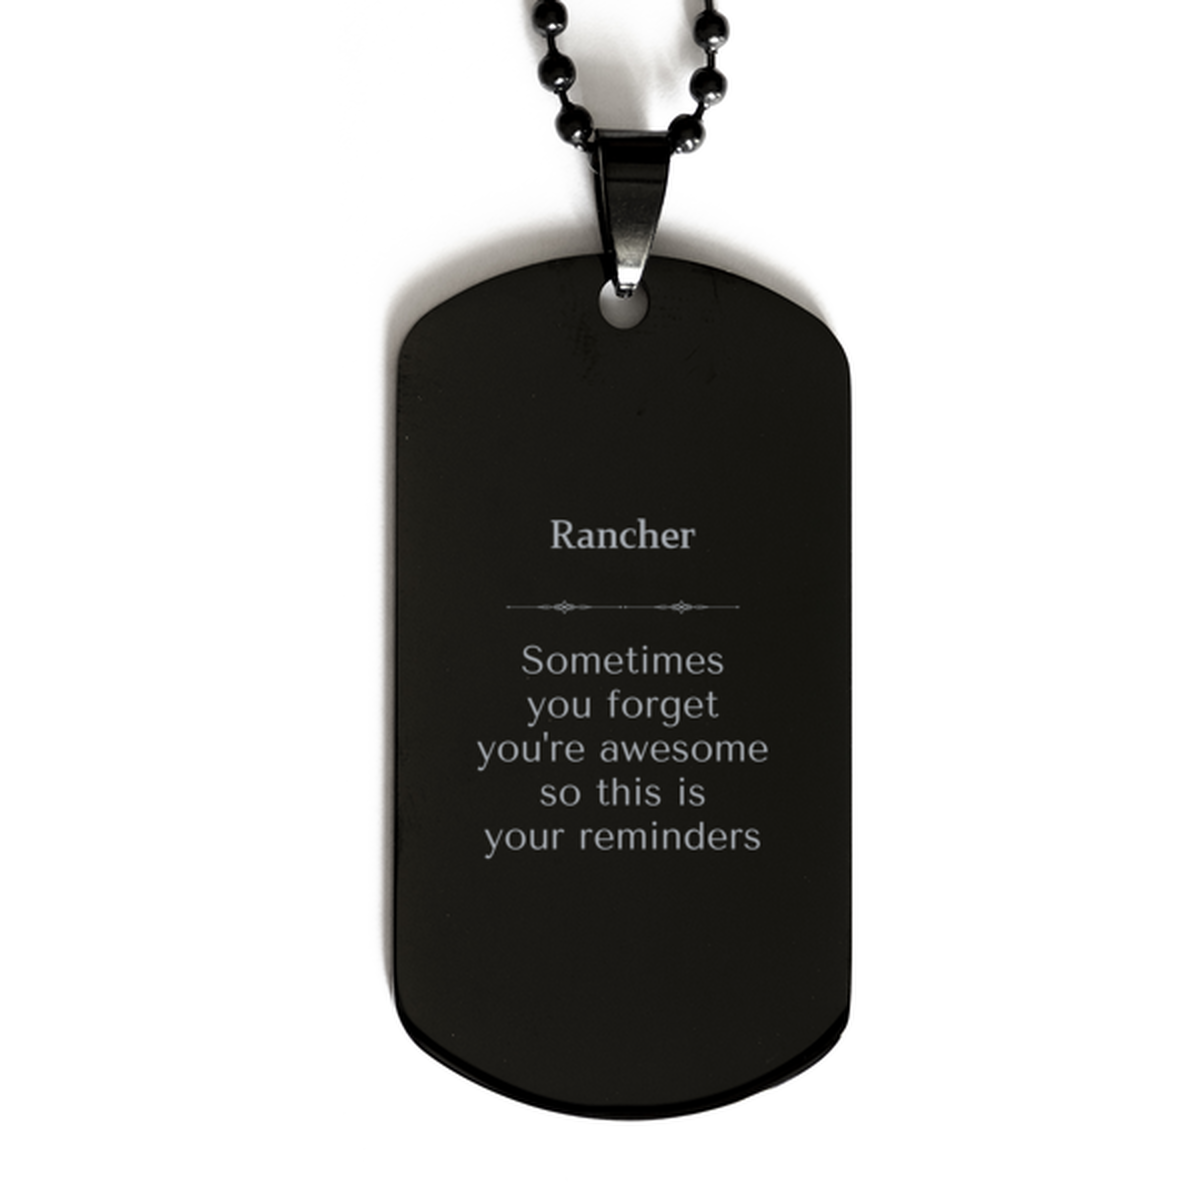 Sentimental Rancher Black Dog Tag, Rancher Sometimes you forget you're awesome so this is your reminders, Graduation Christmas Birthday Gifts for Rancher, Men, Women, Coworkers